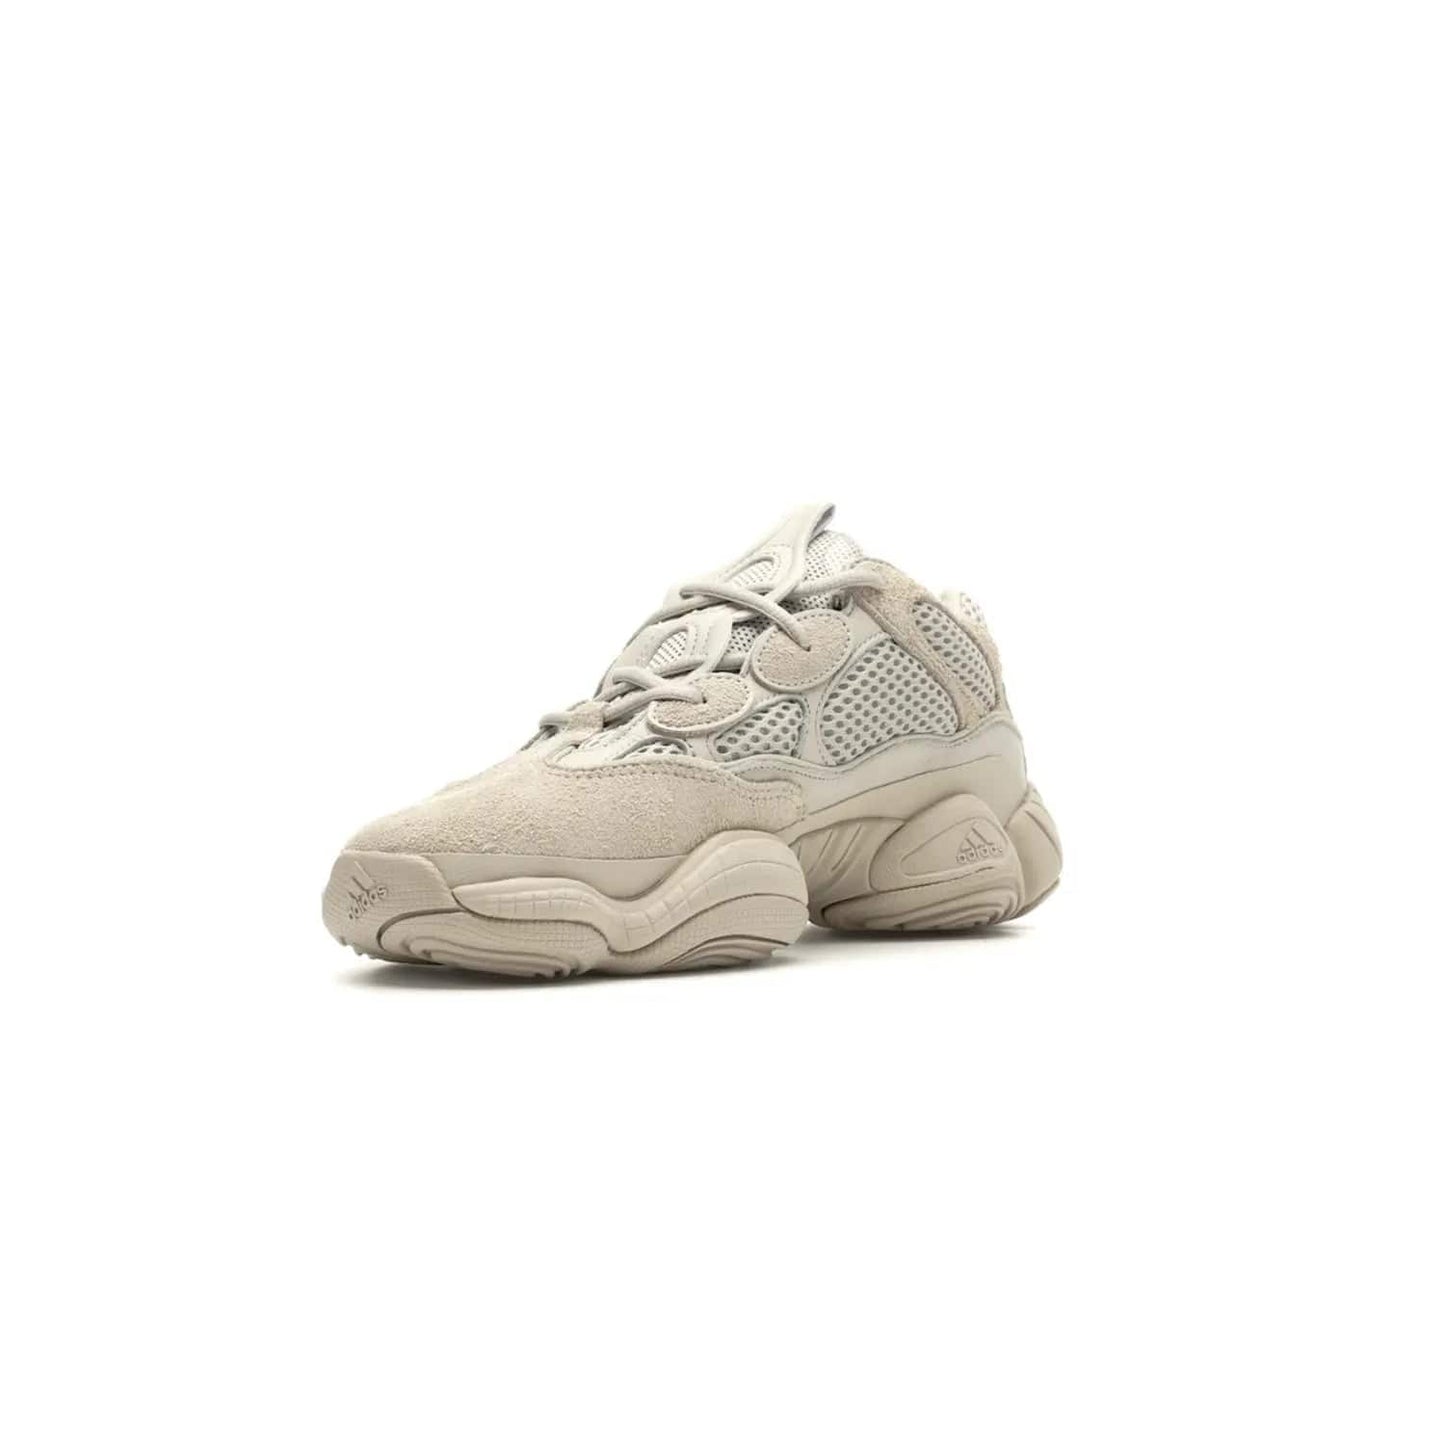 adidas Yeezy 500 Blush - Image 14 - Only at www.BallersClubKickz.com - Step up your sneaker game with the Adidas Yeezy 500 Blush. Monochromatic pale pink palette, hiking-inspired suede/mesh construction, plus adiPRENE sole for comfort and performance. Get the Adidas Yeezy 500 and experience true style and comfort.